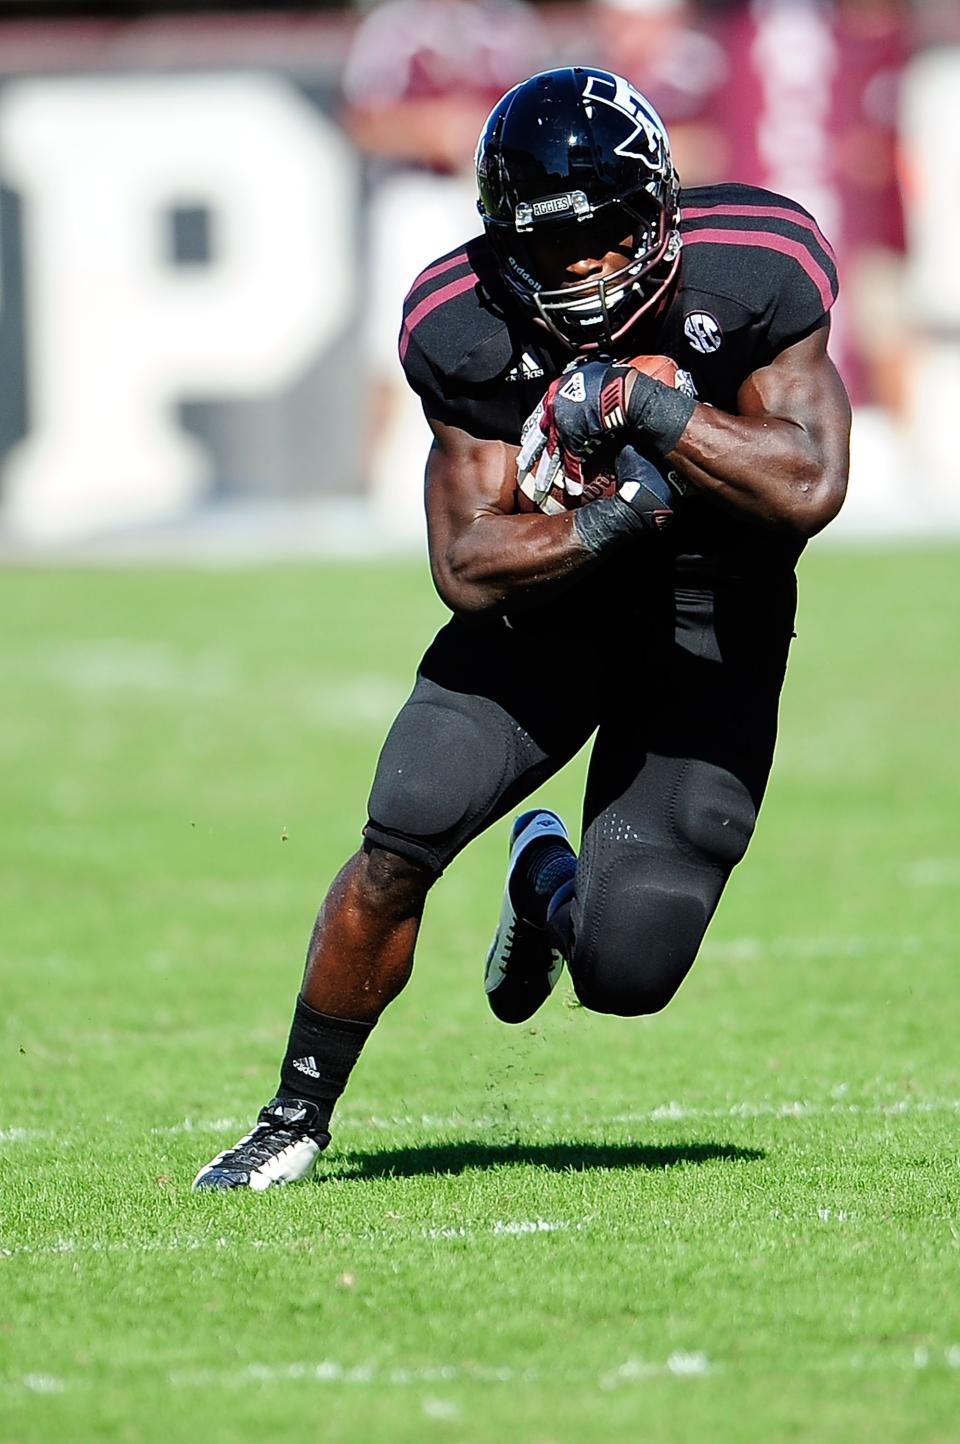 Christine Michael #33 of the Texas A&M Aggies runs for yards against the Mississippi State Bulldogs at Wade Davis Stadium on November 3, 2012 in Starkville, Mississippi. (Photo by Stacy Revere/Getty Images)